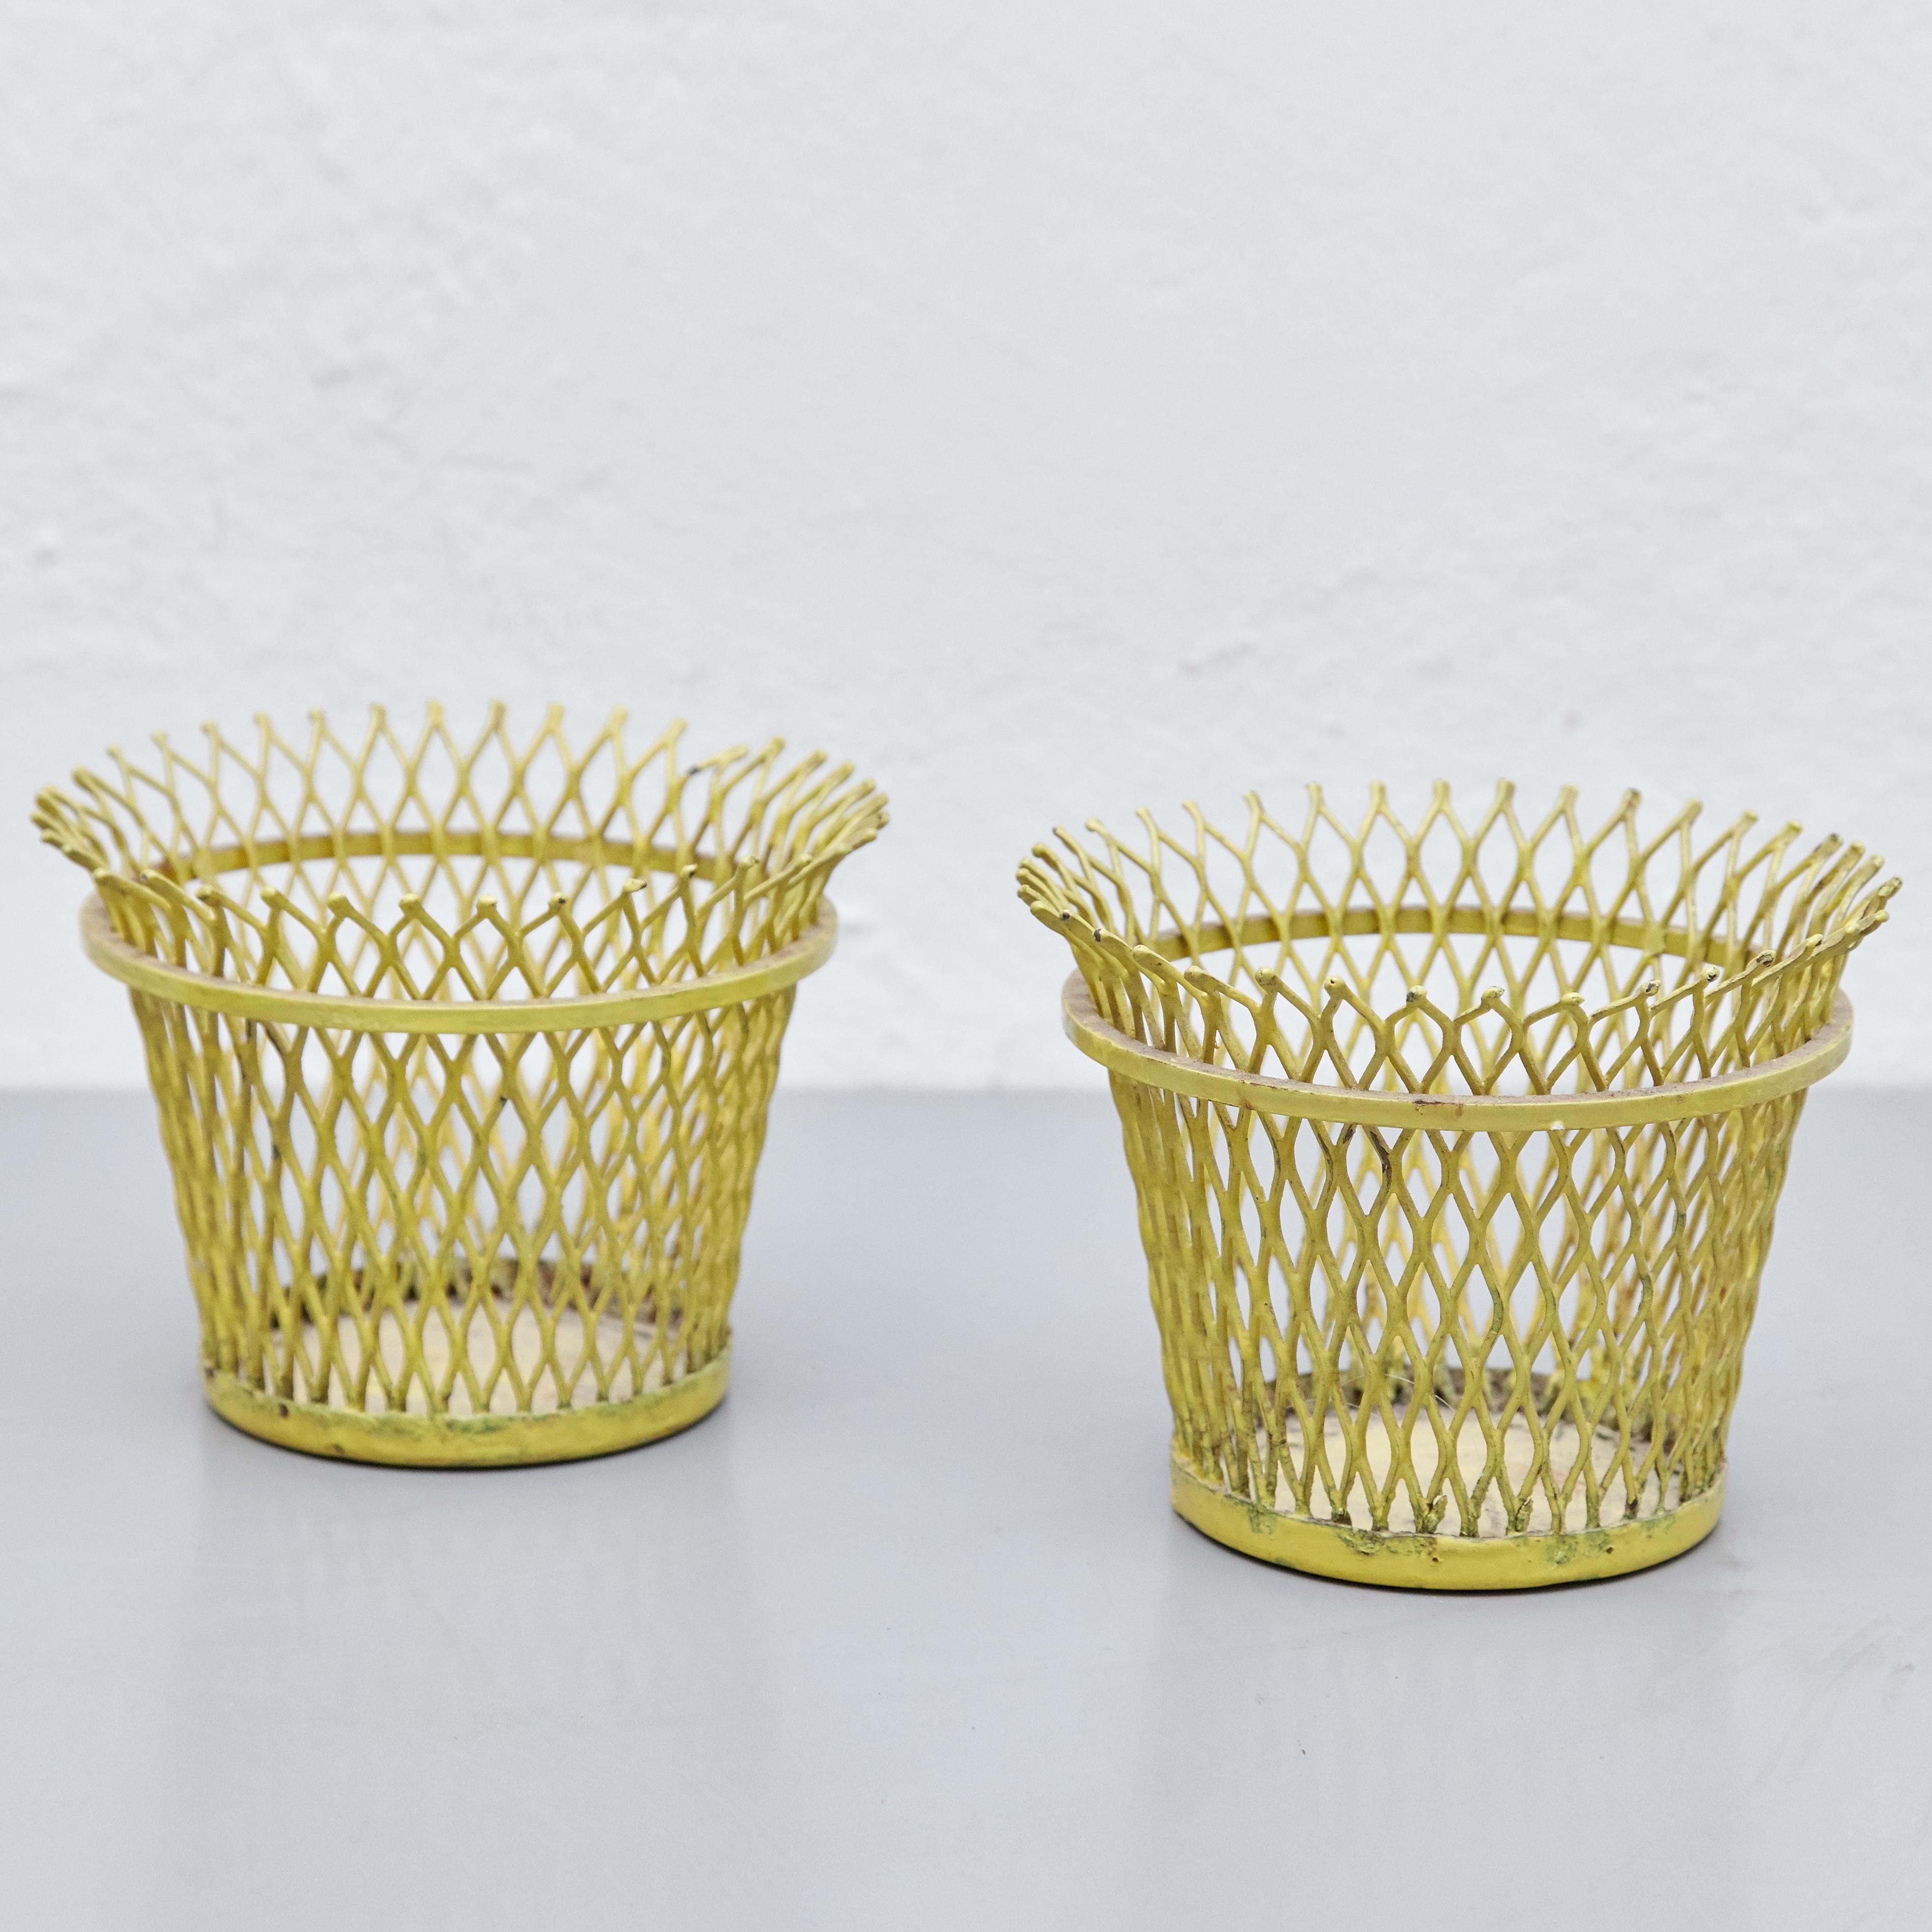 Enameled metal baskets designed by Mathieu Mategot.
Manufactured by Ateliers Mategot (France,) circa 1950.
Lacquered perforated metal, it has some traces of rust.

In original condition, with wear consistent with age and use, preserving a